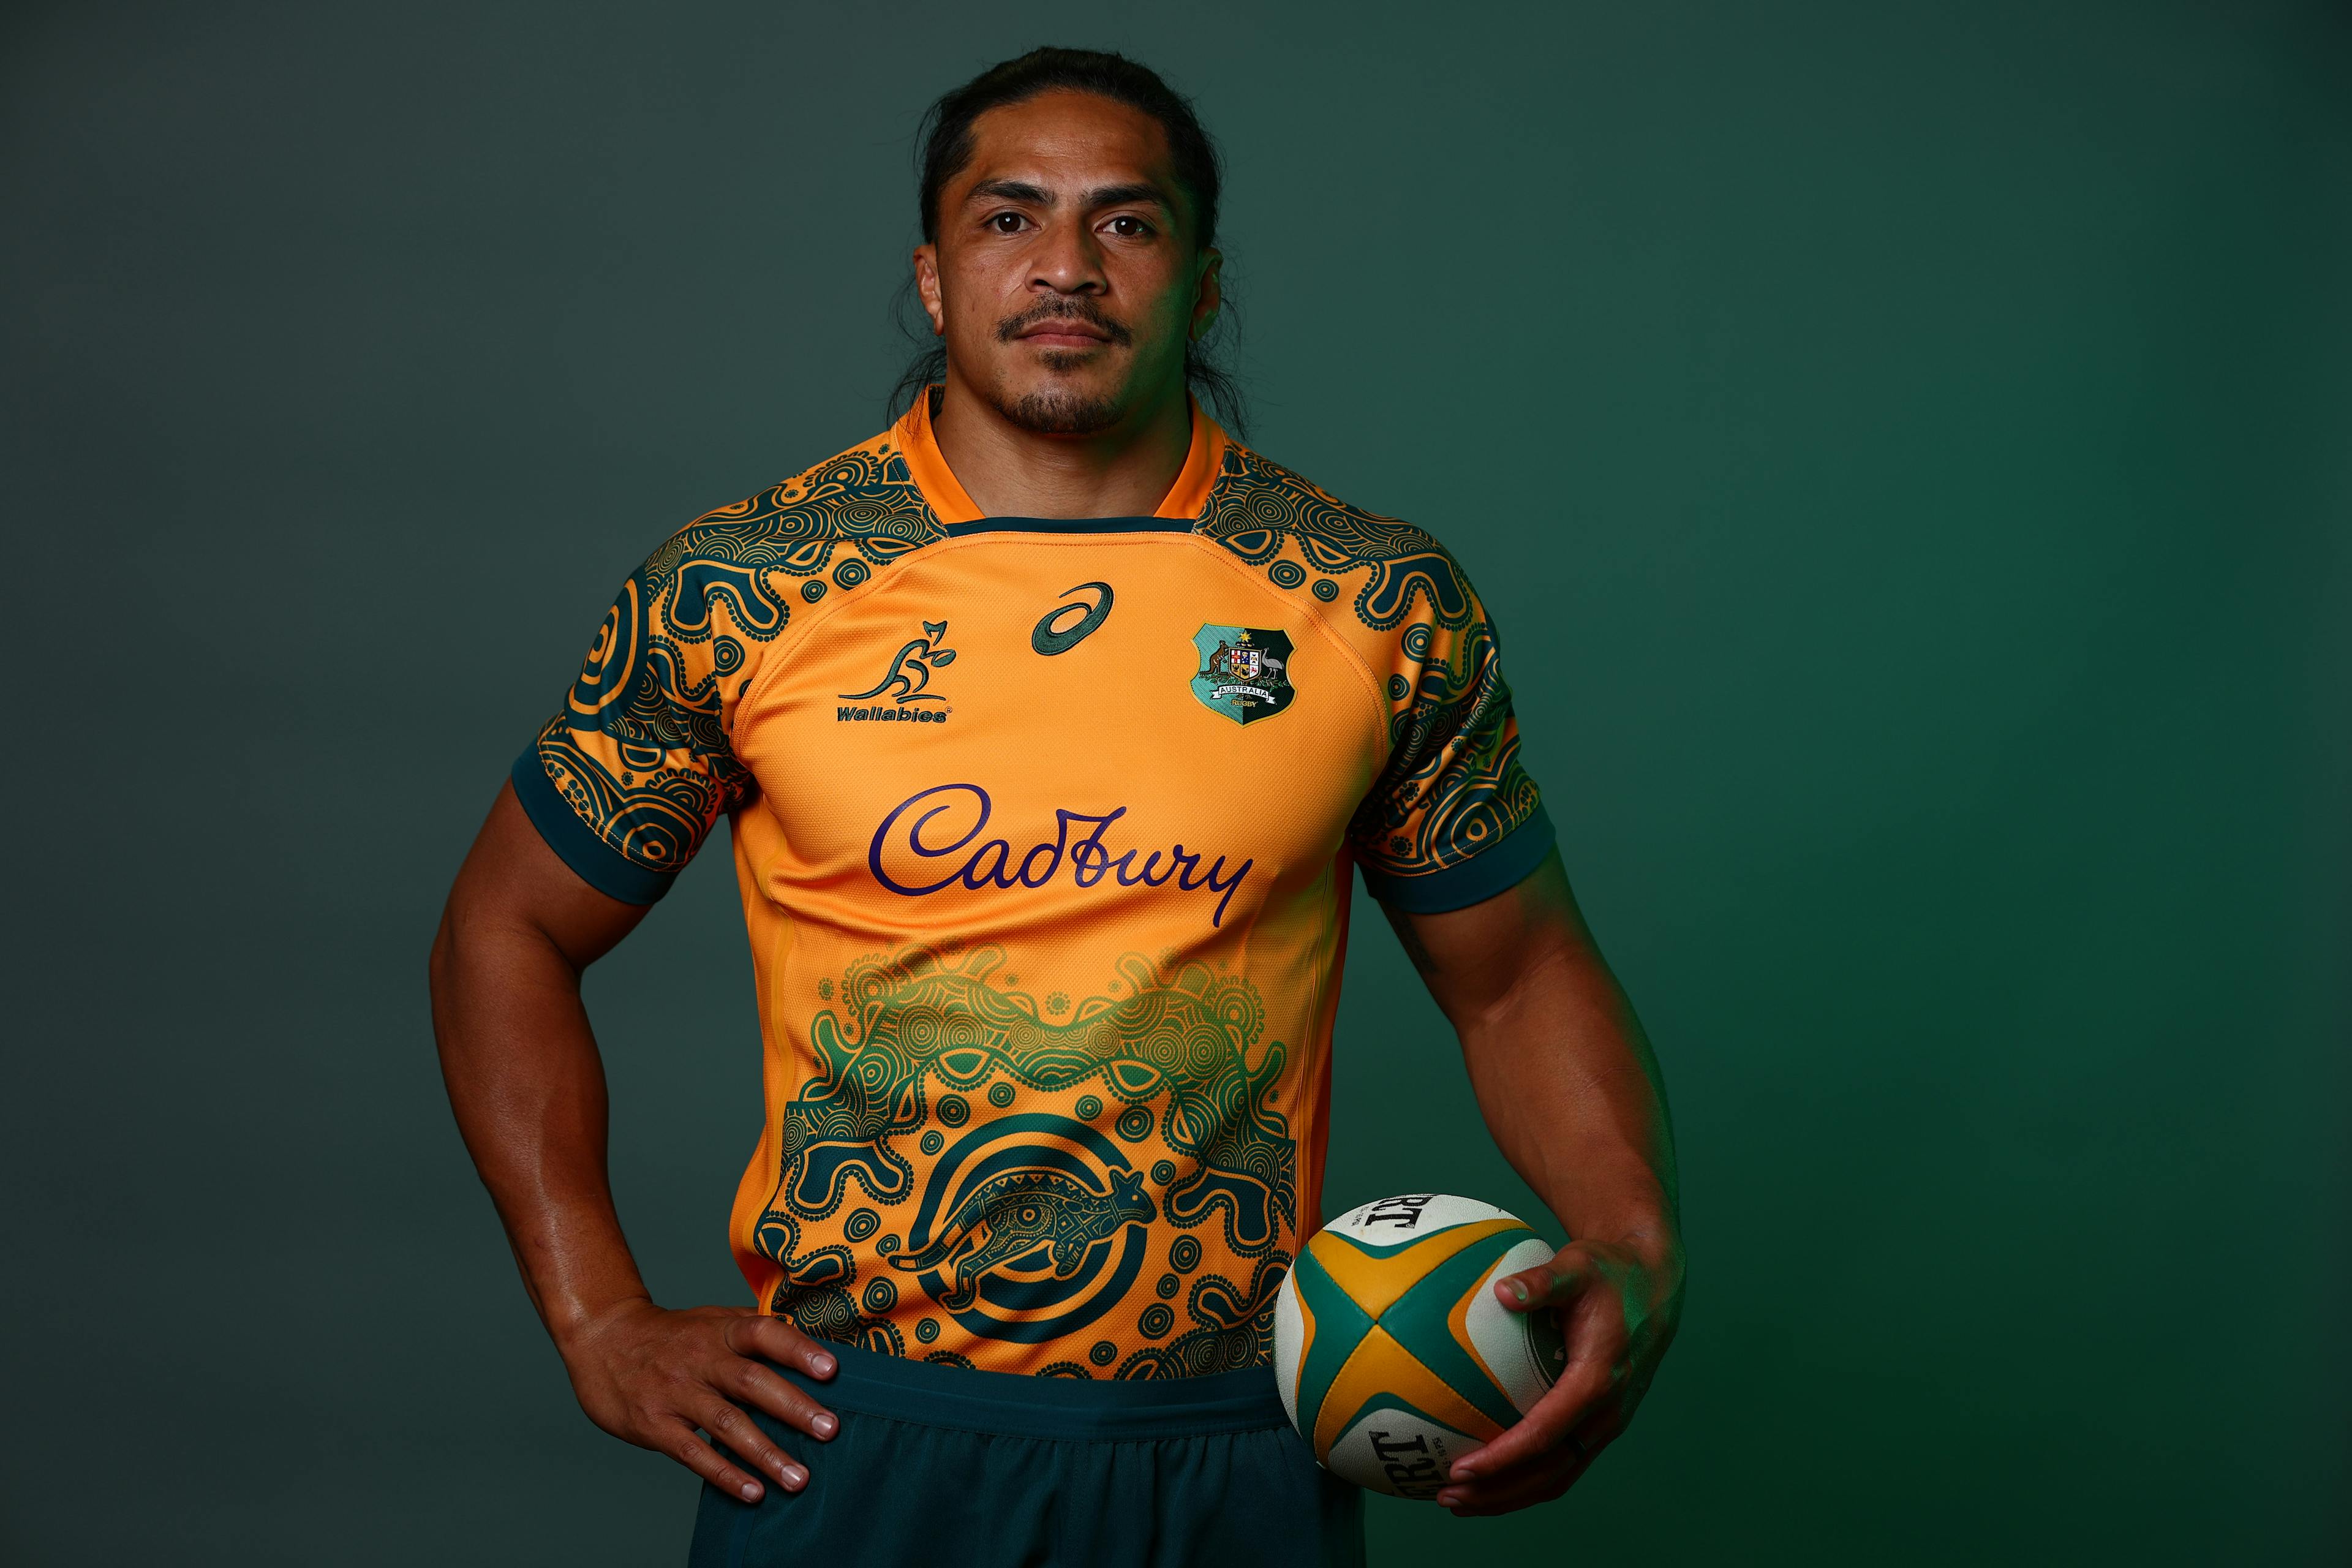 Pete Samu wearing the 2022 First Nations jersey. Photo: Getty Images